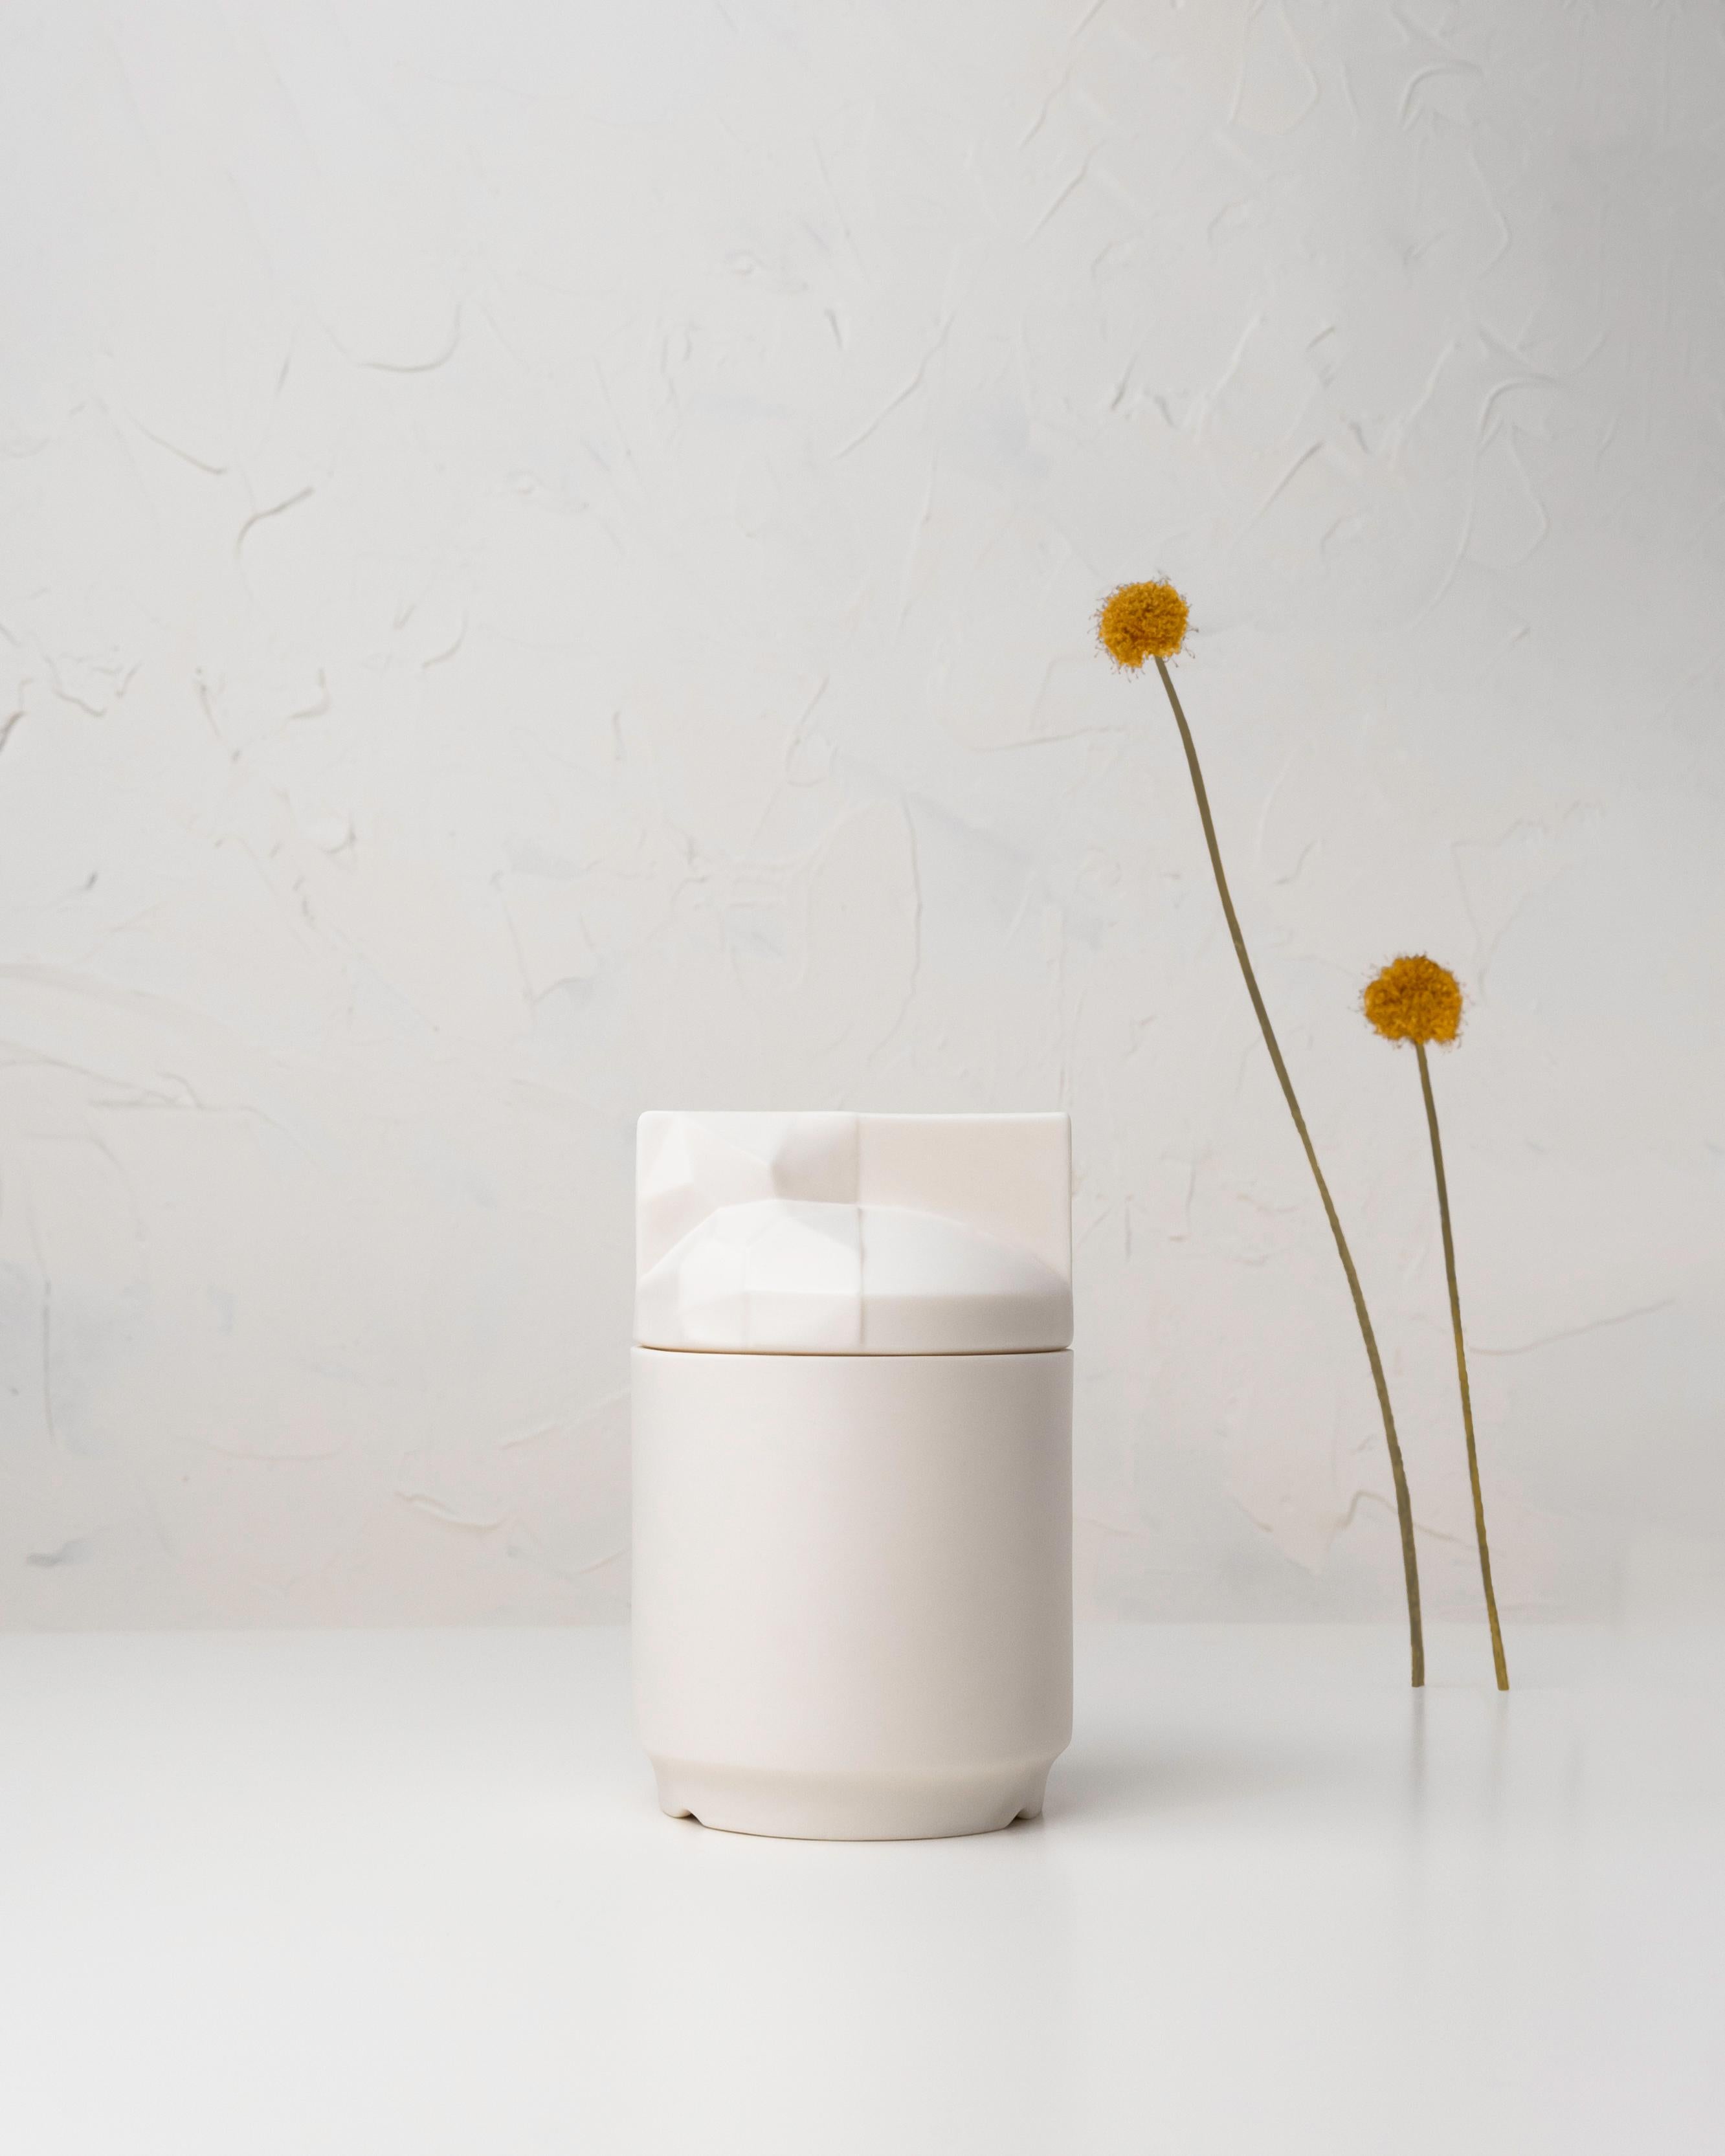 Origami - minimalist ceramic container, Parian porcelain. 

A collection inspired by nature and classical forms.

Parian porcelain vessels, unglazed.

• 160 g natural soy wax

• app 30 h burn time

• wooden wick

• fragrance oils